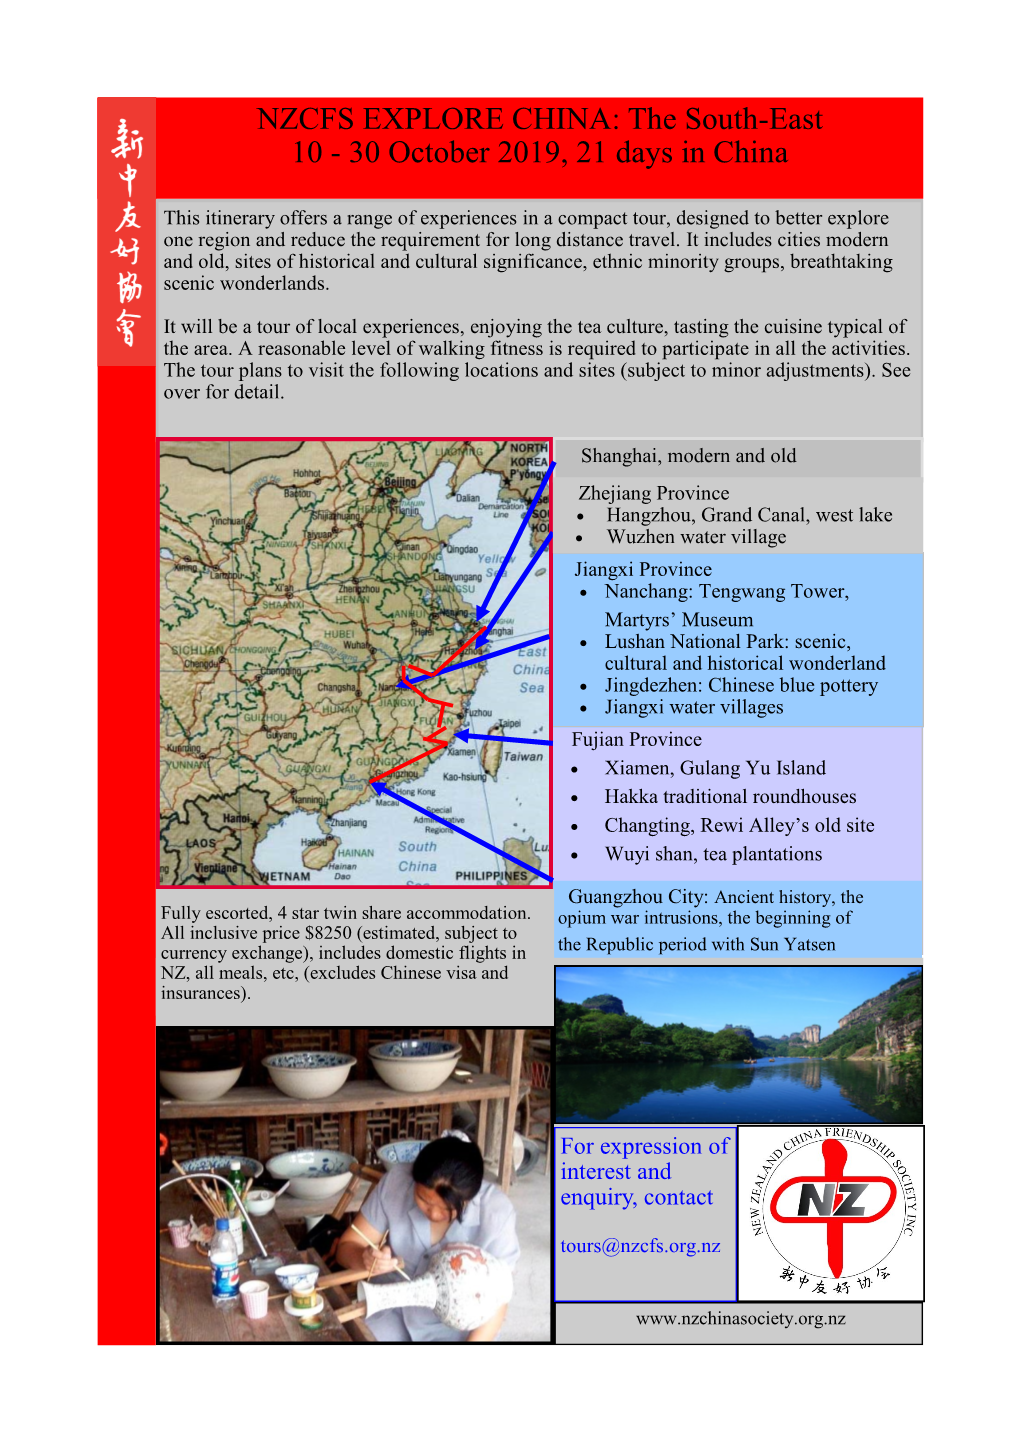 NZCFS EXPLORE CHINA: the South-East 10 - 30 October 2019, 21 Days in China